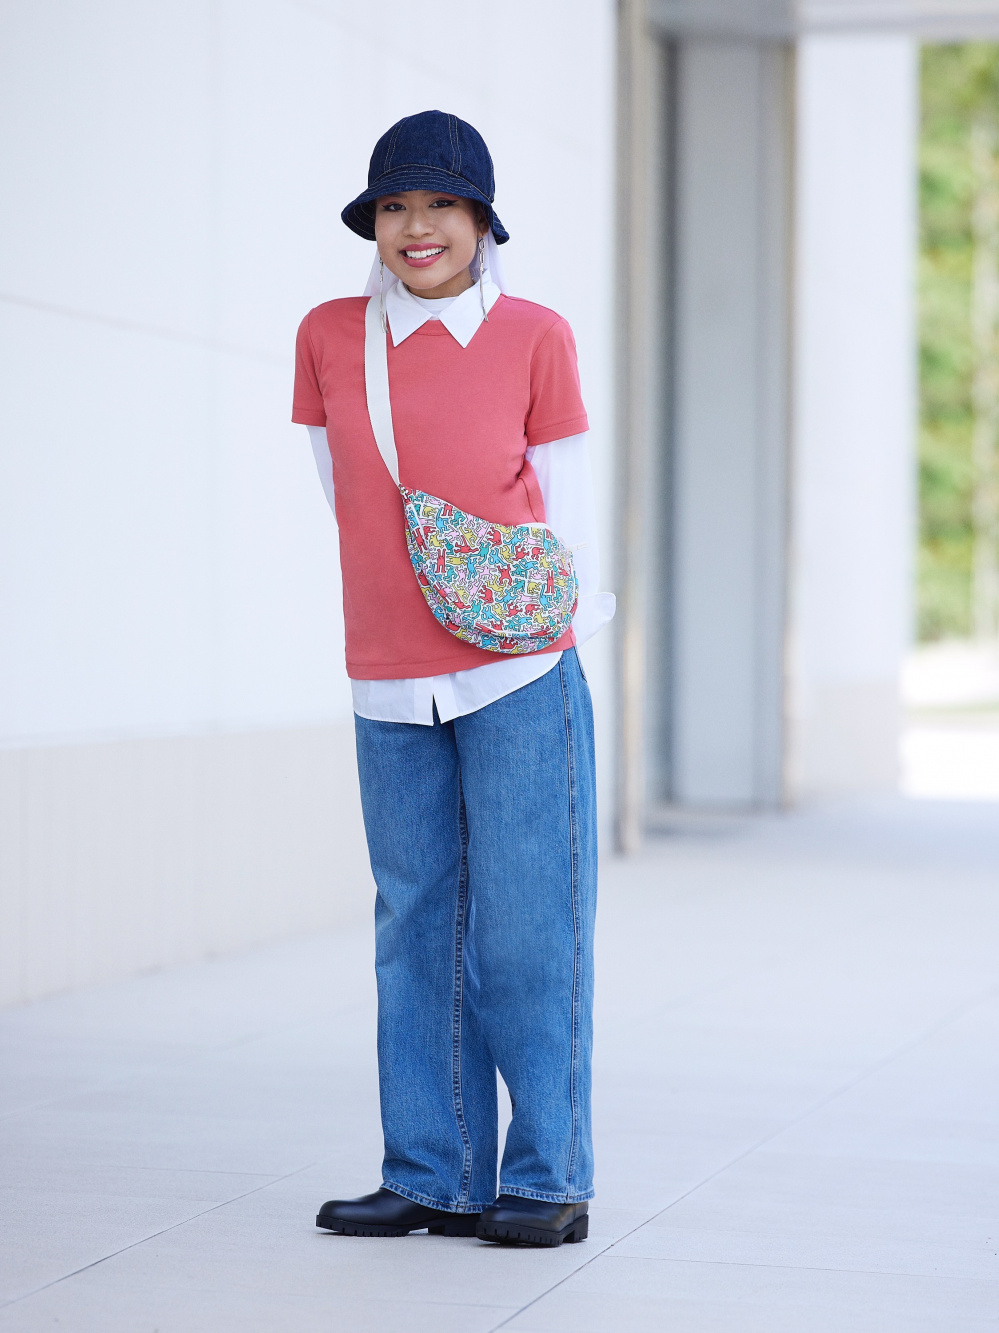 Check styling ideas for「PEACE FOR ALL (DICK BRUNA) (Short Sleeve Graphic  T-Shirt)、Baggy Jeans (Mid-Rise - Length 72 cm)*」